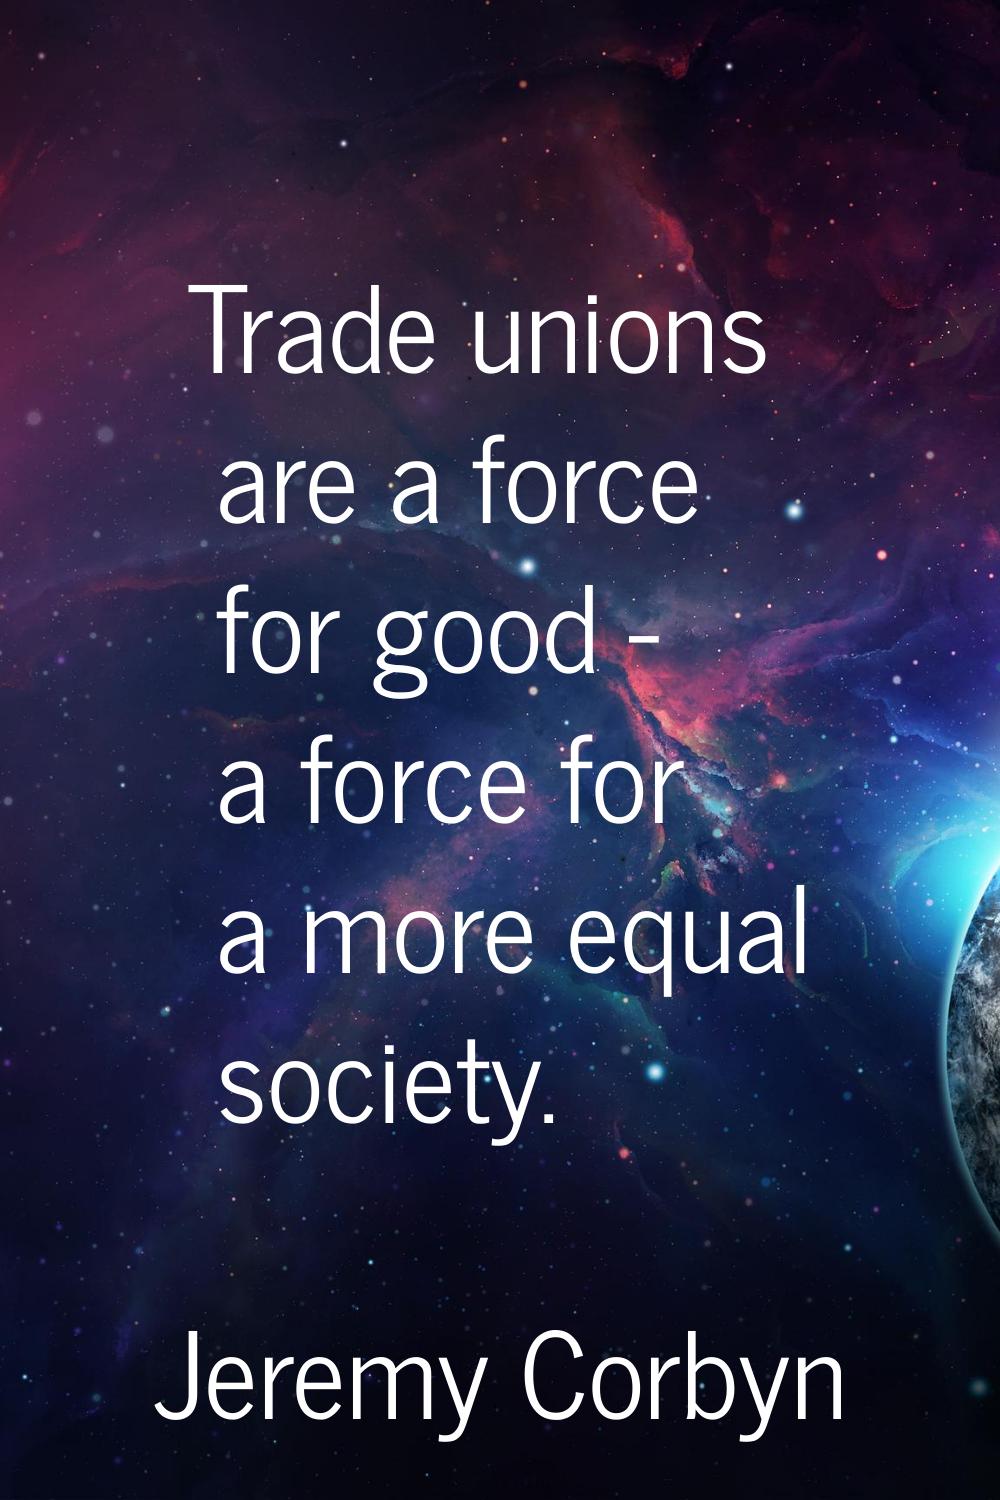 Trade unions are a force for good - a force for a more equal society.